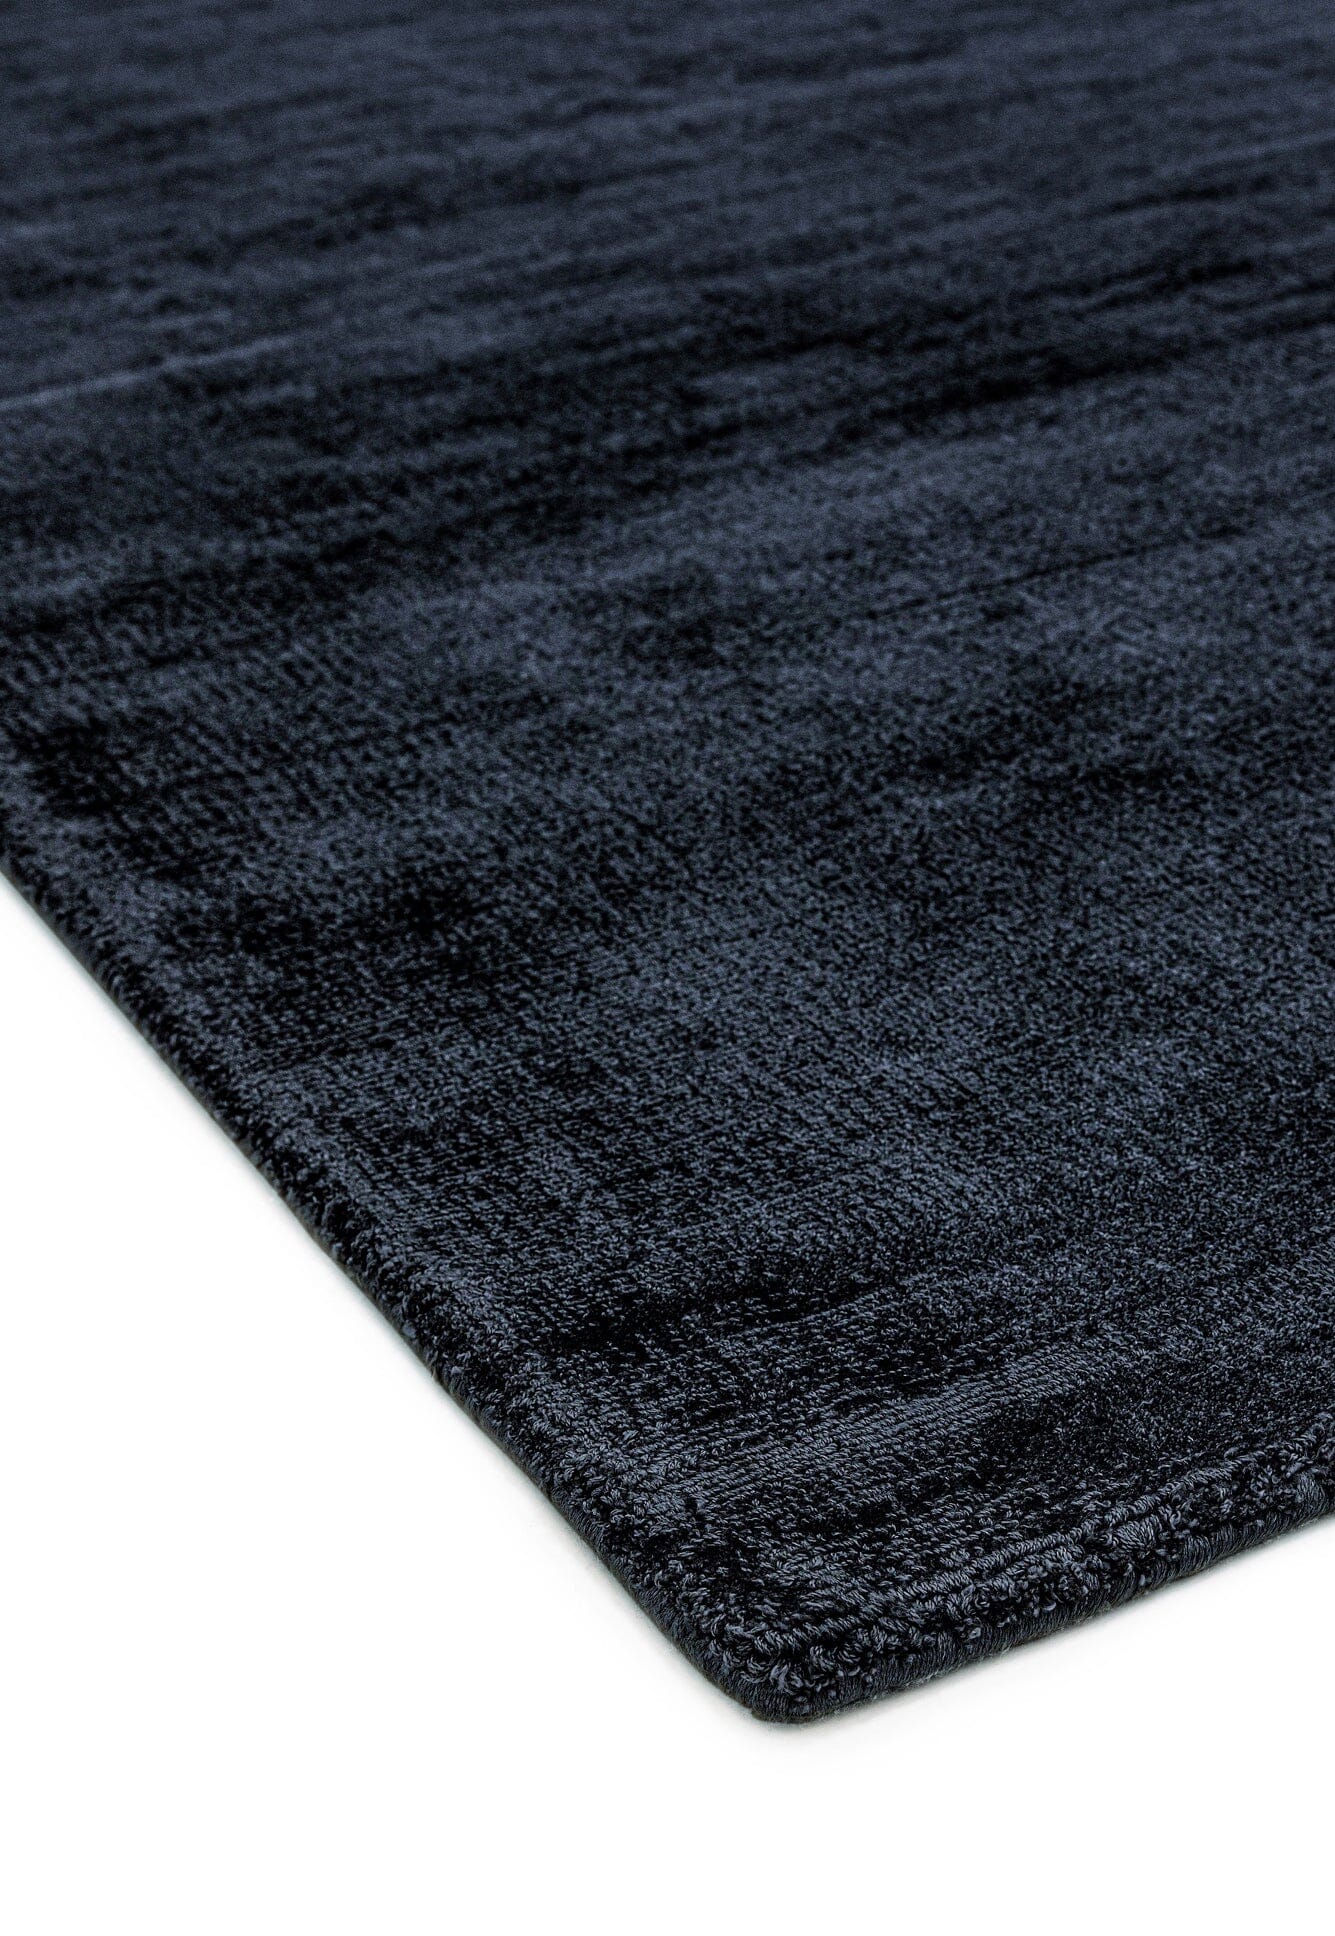  Asiatic Carpets-Asiatic Carpets Blade Hand Woven Rug Navy - 120 x 170cm-Blue 725 